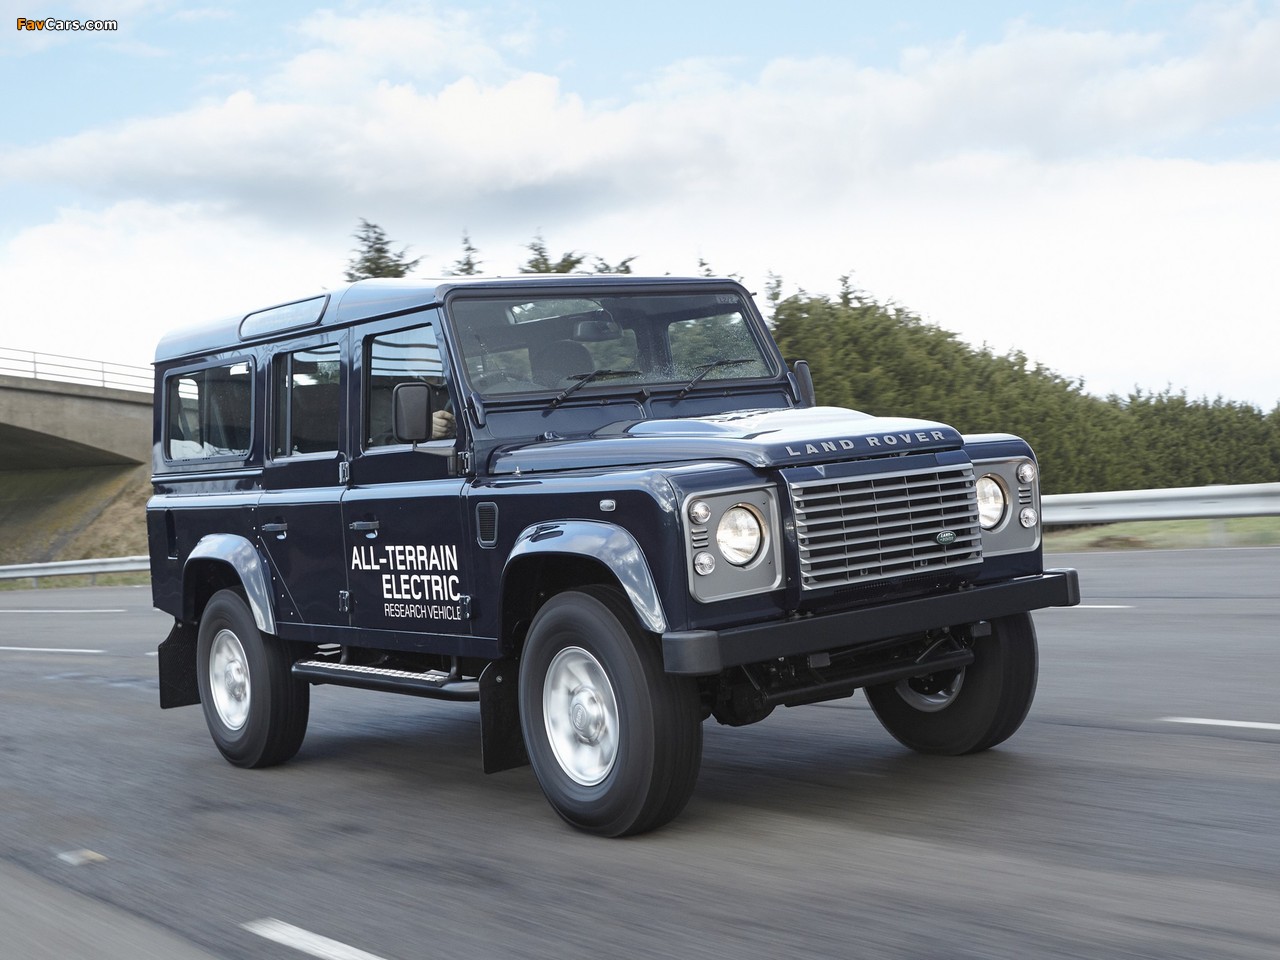 Land Rover Electric Defender Research Vehicle 2013 pictures (1280 x 960)